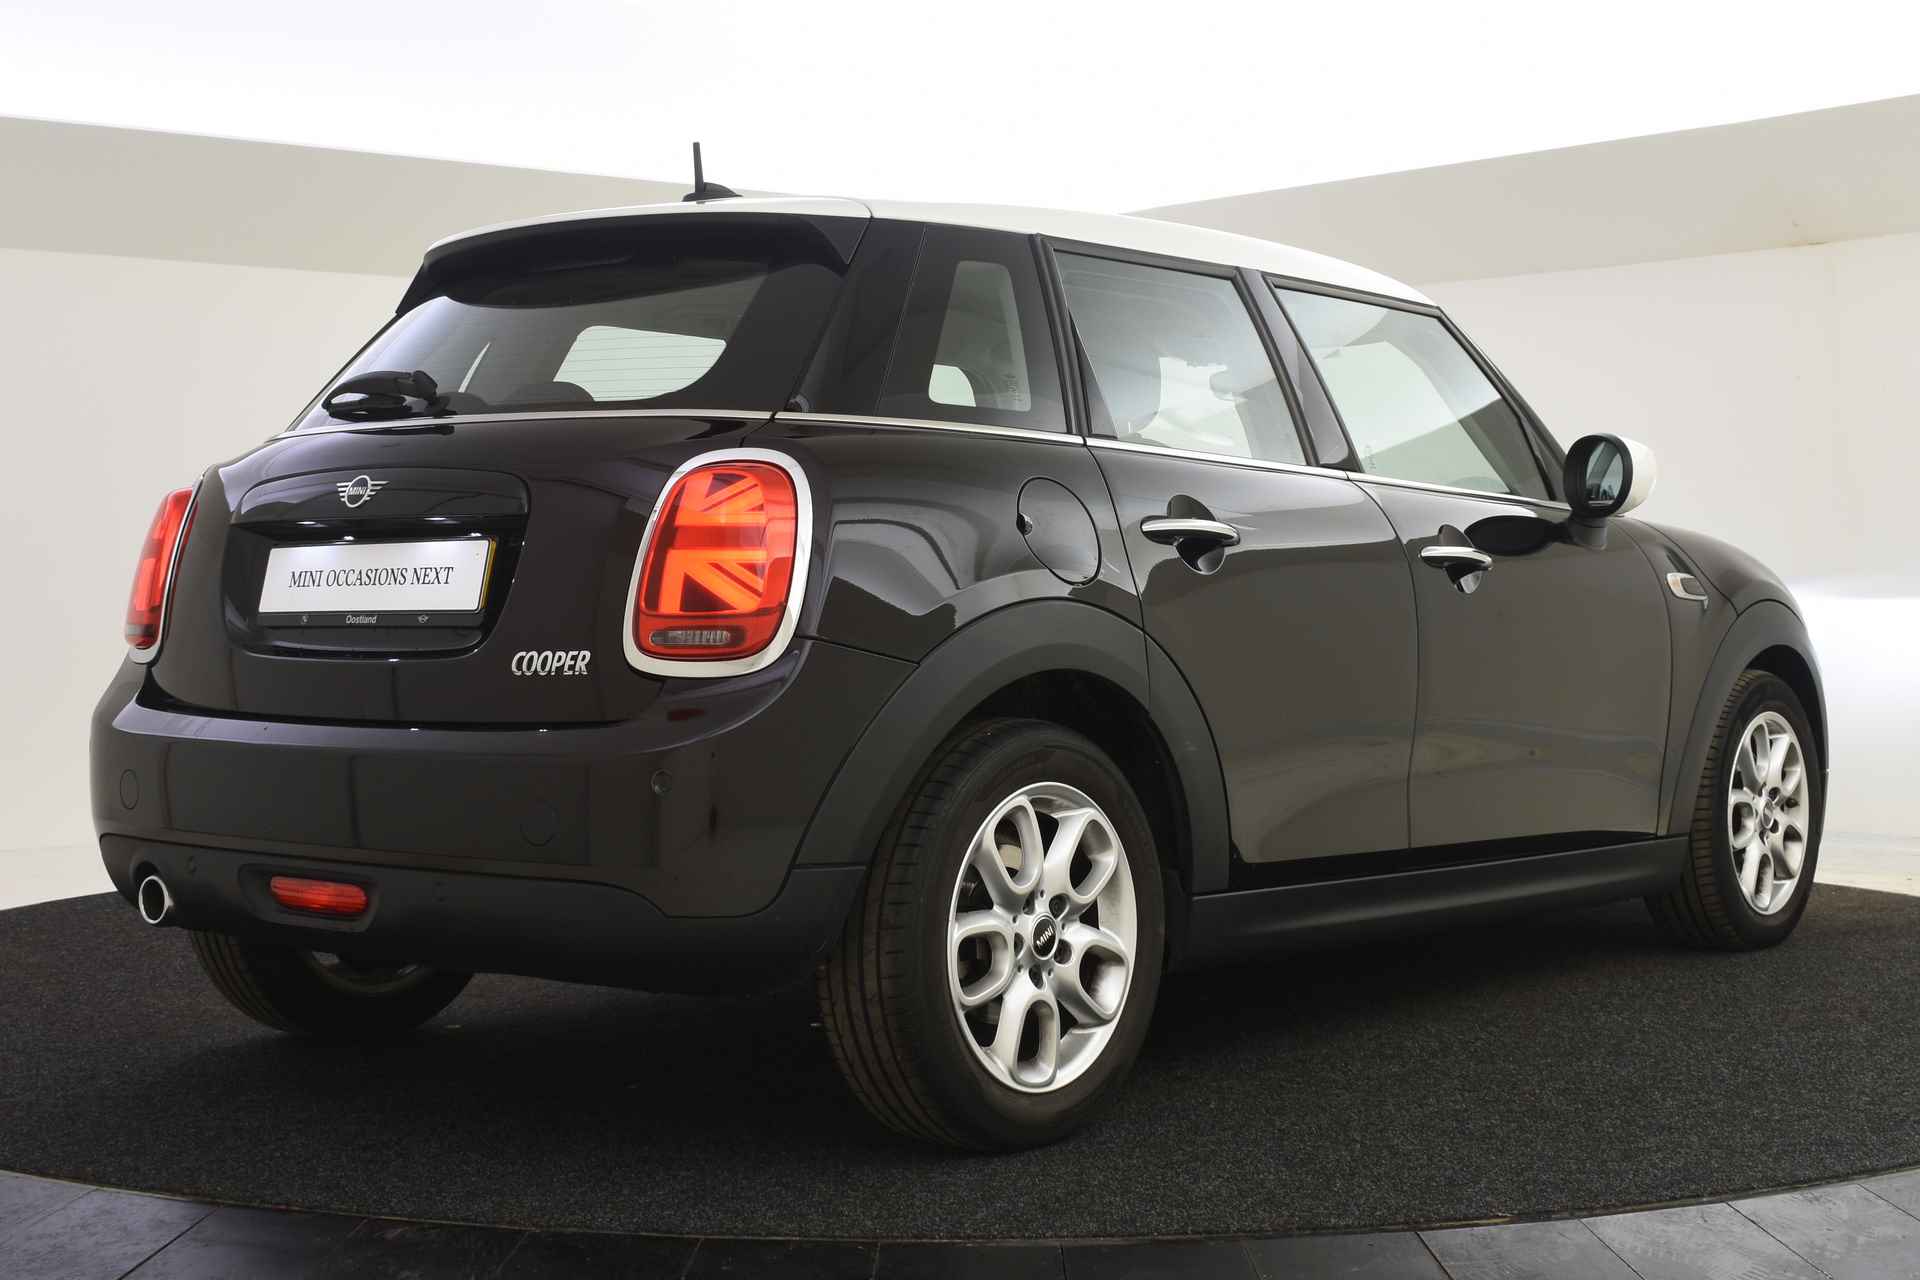 MINI Hatchback Cooper Pepper Automaat / LED / Stoelverwarming / PDC achter / Cruise Control - 13/36